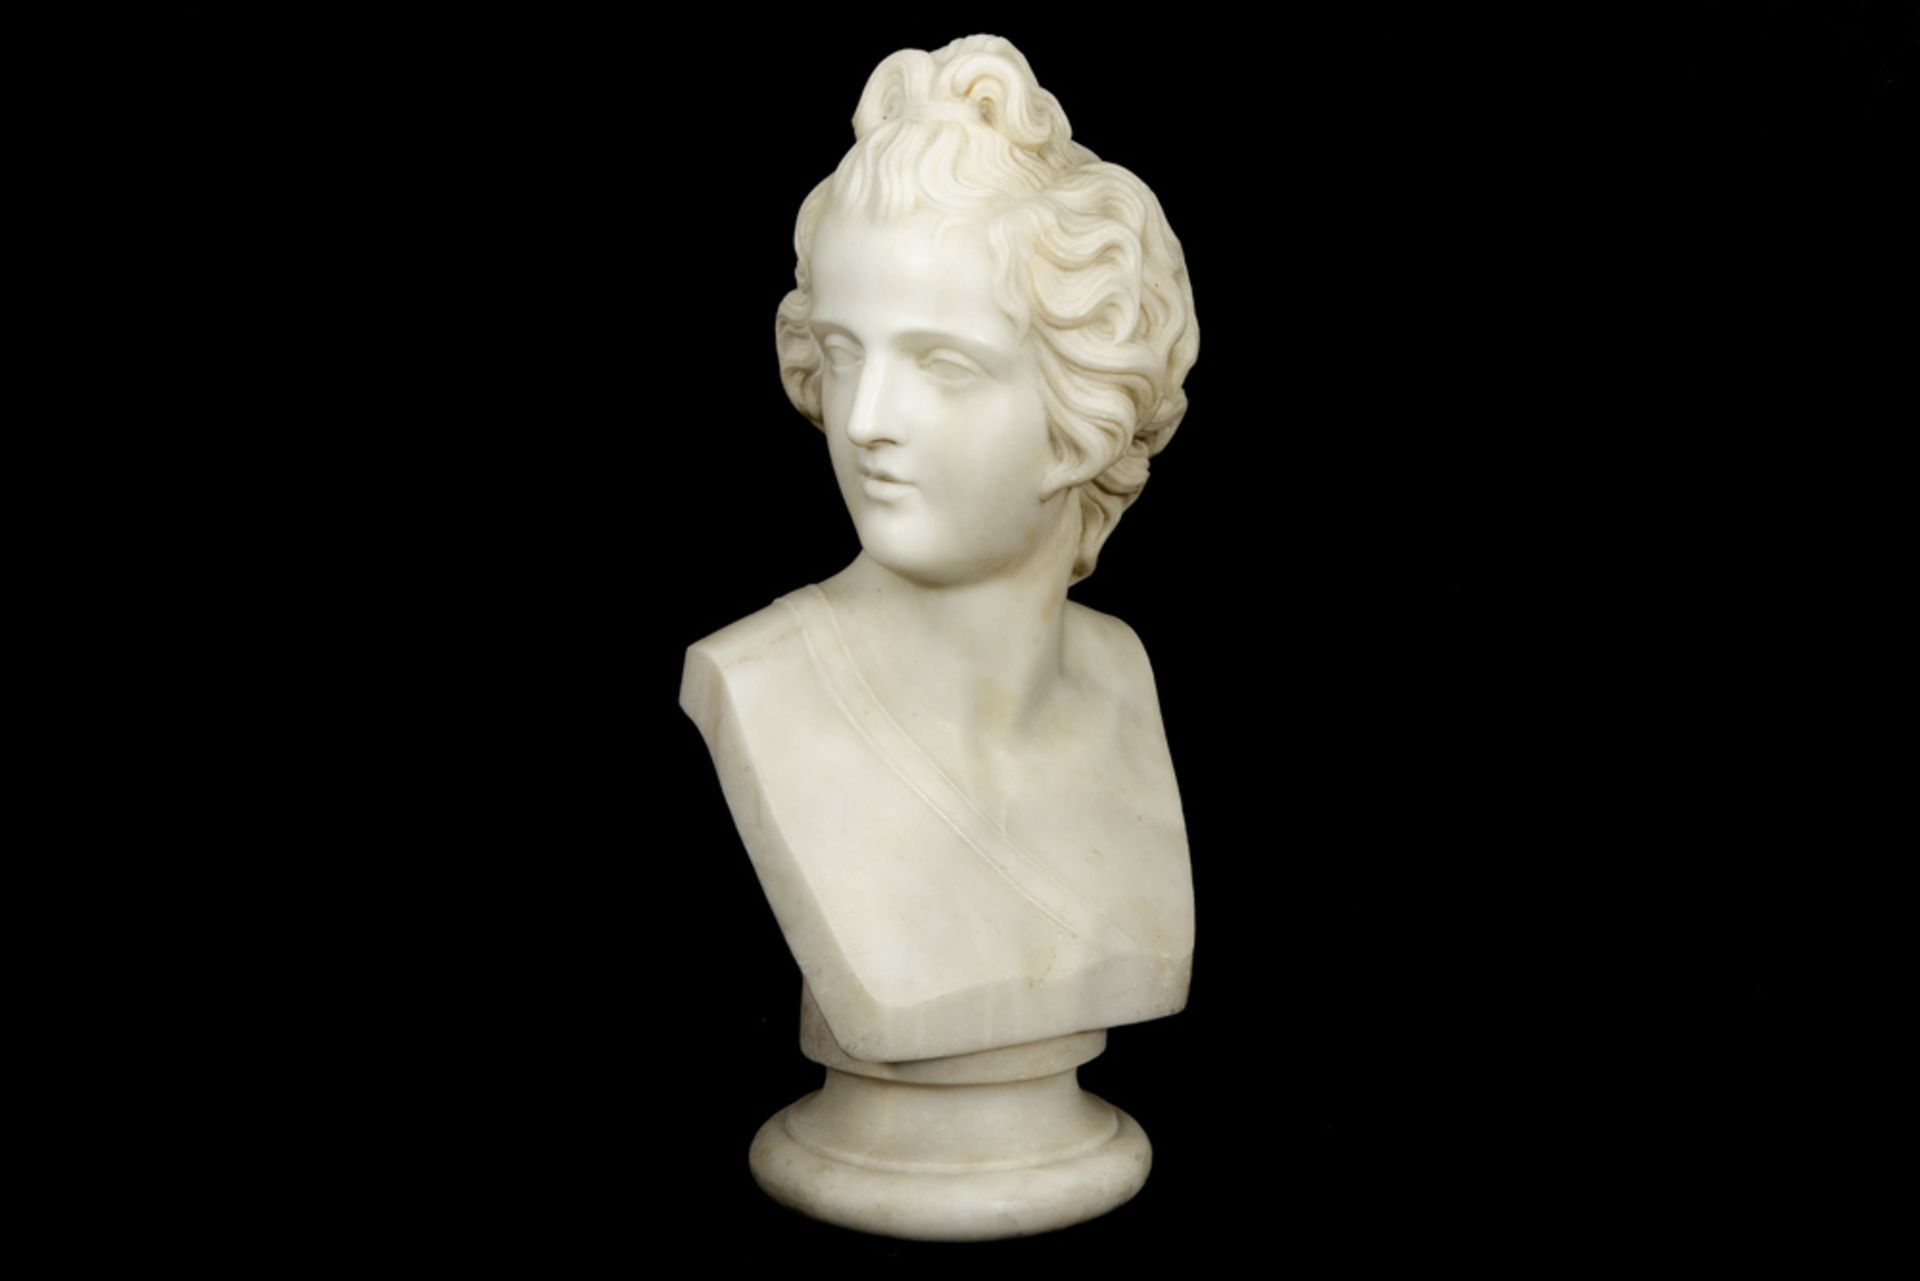 19th Cent. Ioannis Kossos signed "Bust of a Greek Adonis" sculpture in Carrara marble - signed in - Image 2 of 7